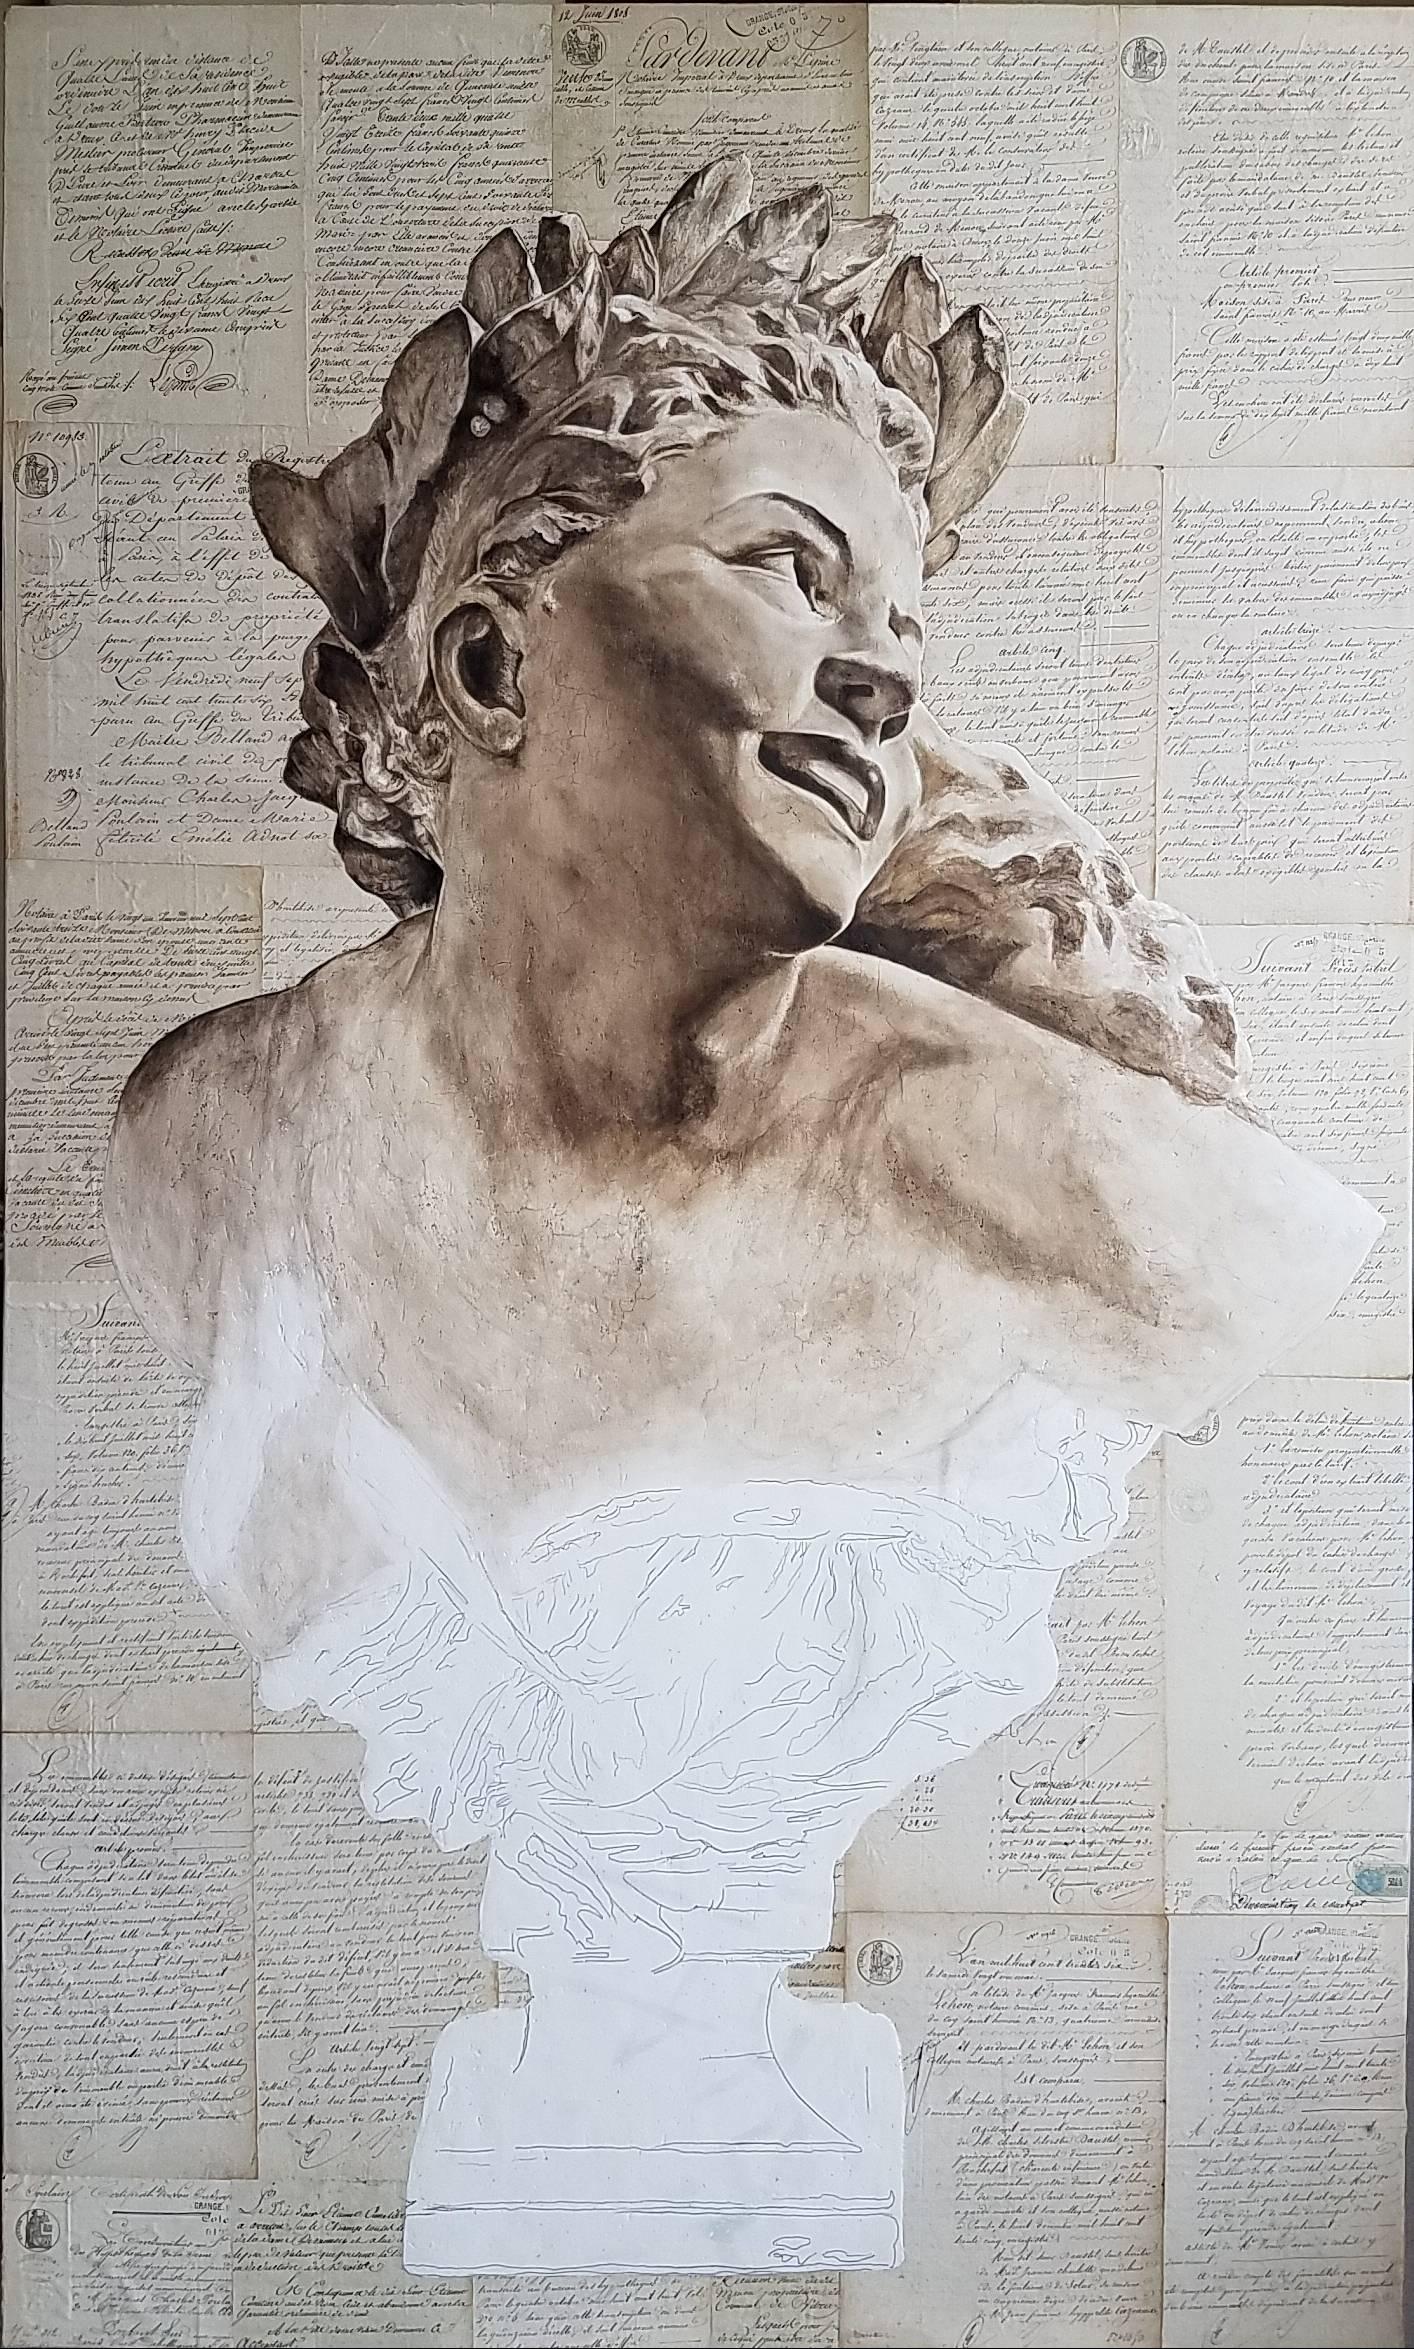 Contemporary Original Oil on Wood Panel, 19th Century Sculpture over Antique French Document